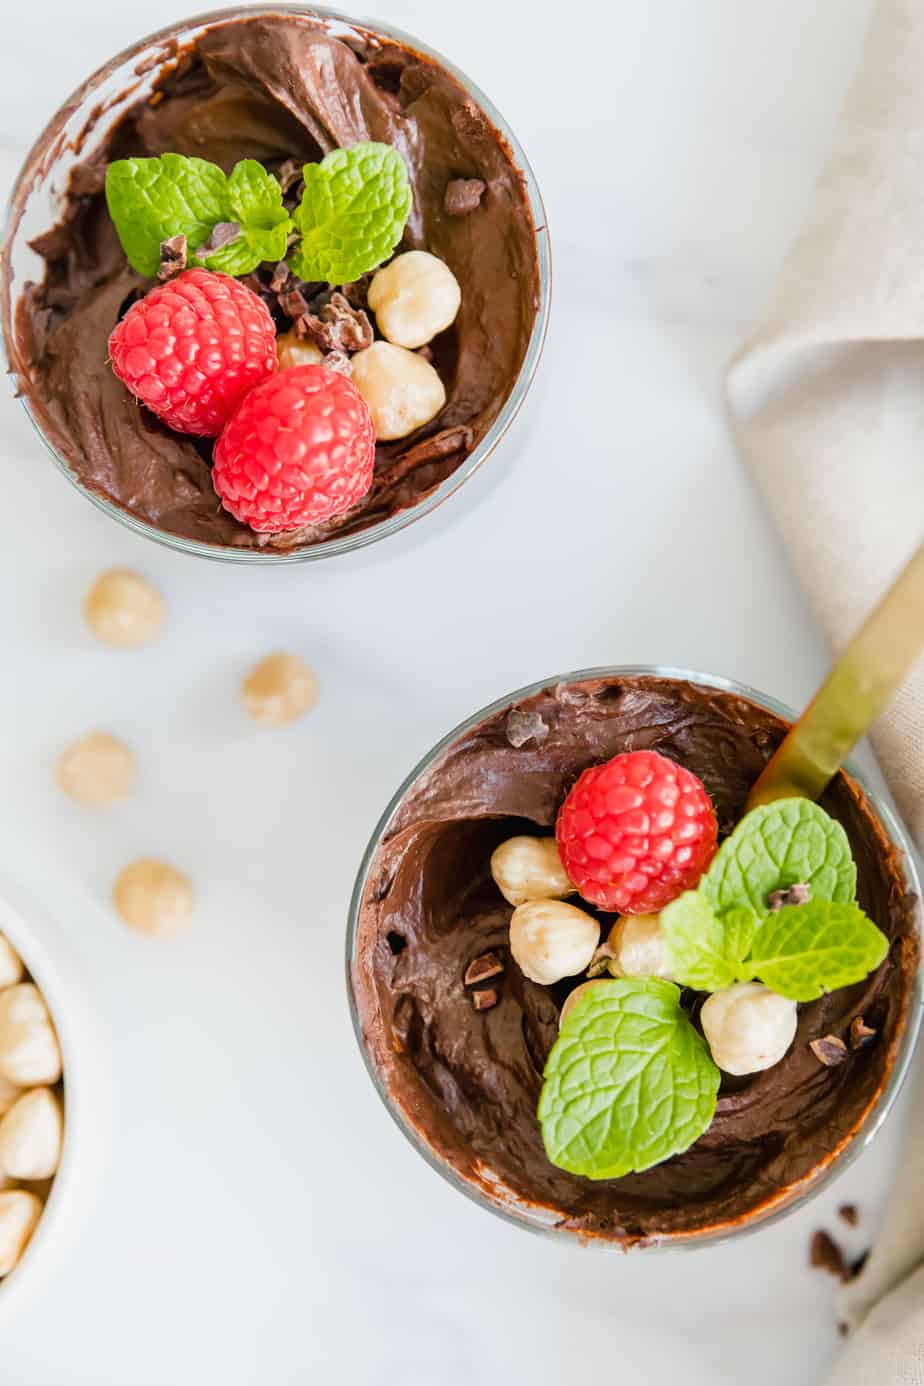 Vegan chocolate mousse with mint and fresh berries.